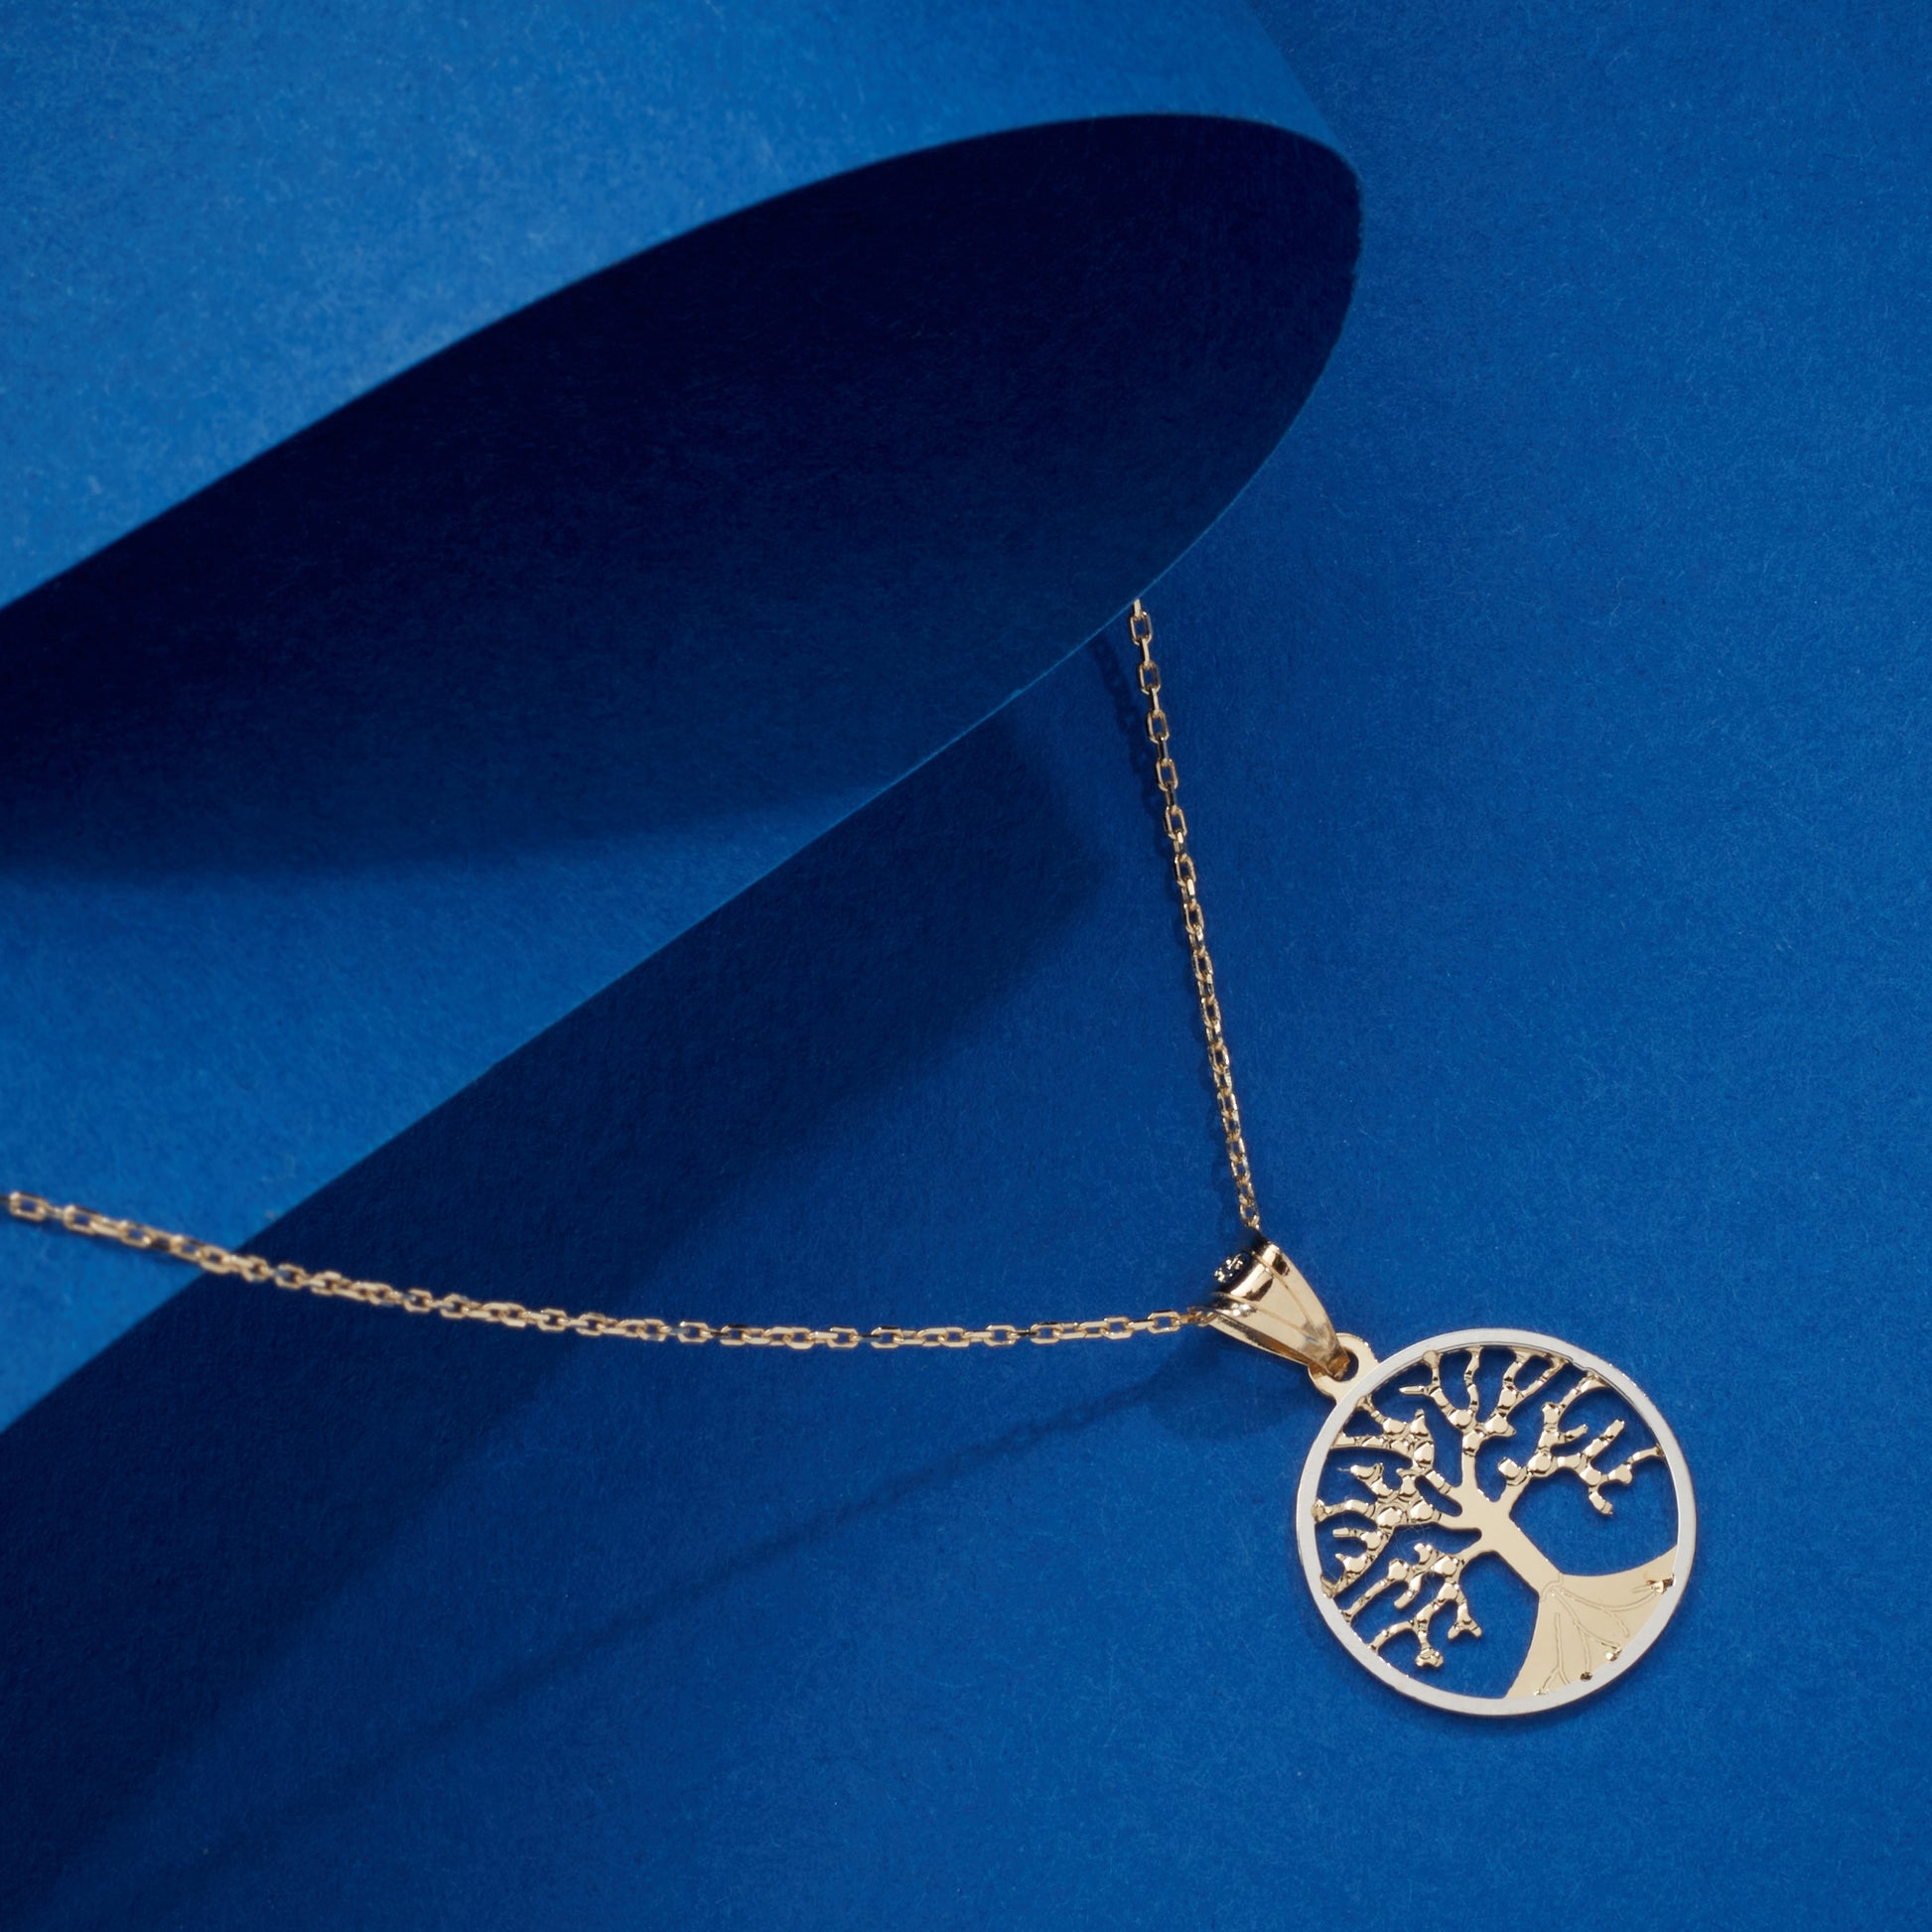 14k gold necklace, mothers day necklace, solid gold necklace, gold tree of life, tree of life pendant, 14k gold family tree, tree of life charm, family tree necklace, dainty gold necklace, yellow rose white, necklace for mom, gold mom necklace, 14k necklace for mom, 